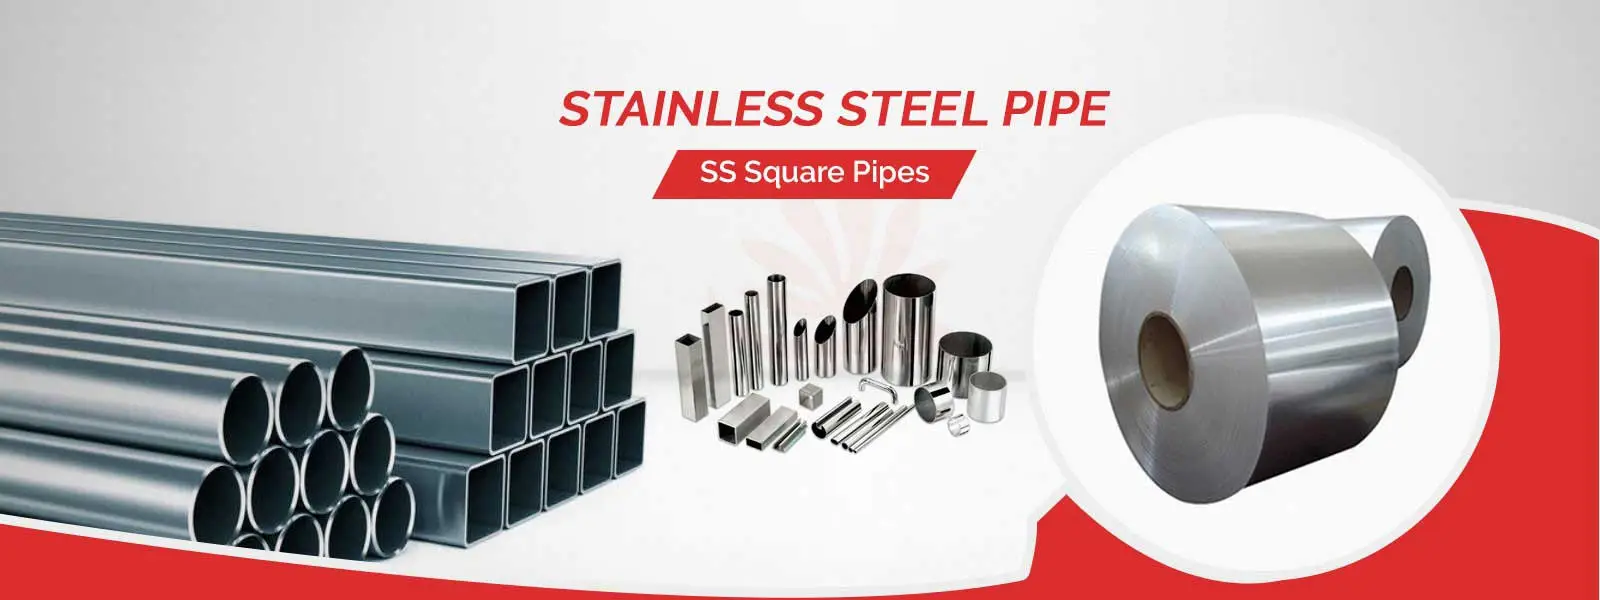 Stainless Steel Pipe Manufacturers in Jharkhand